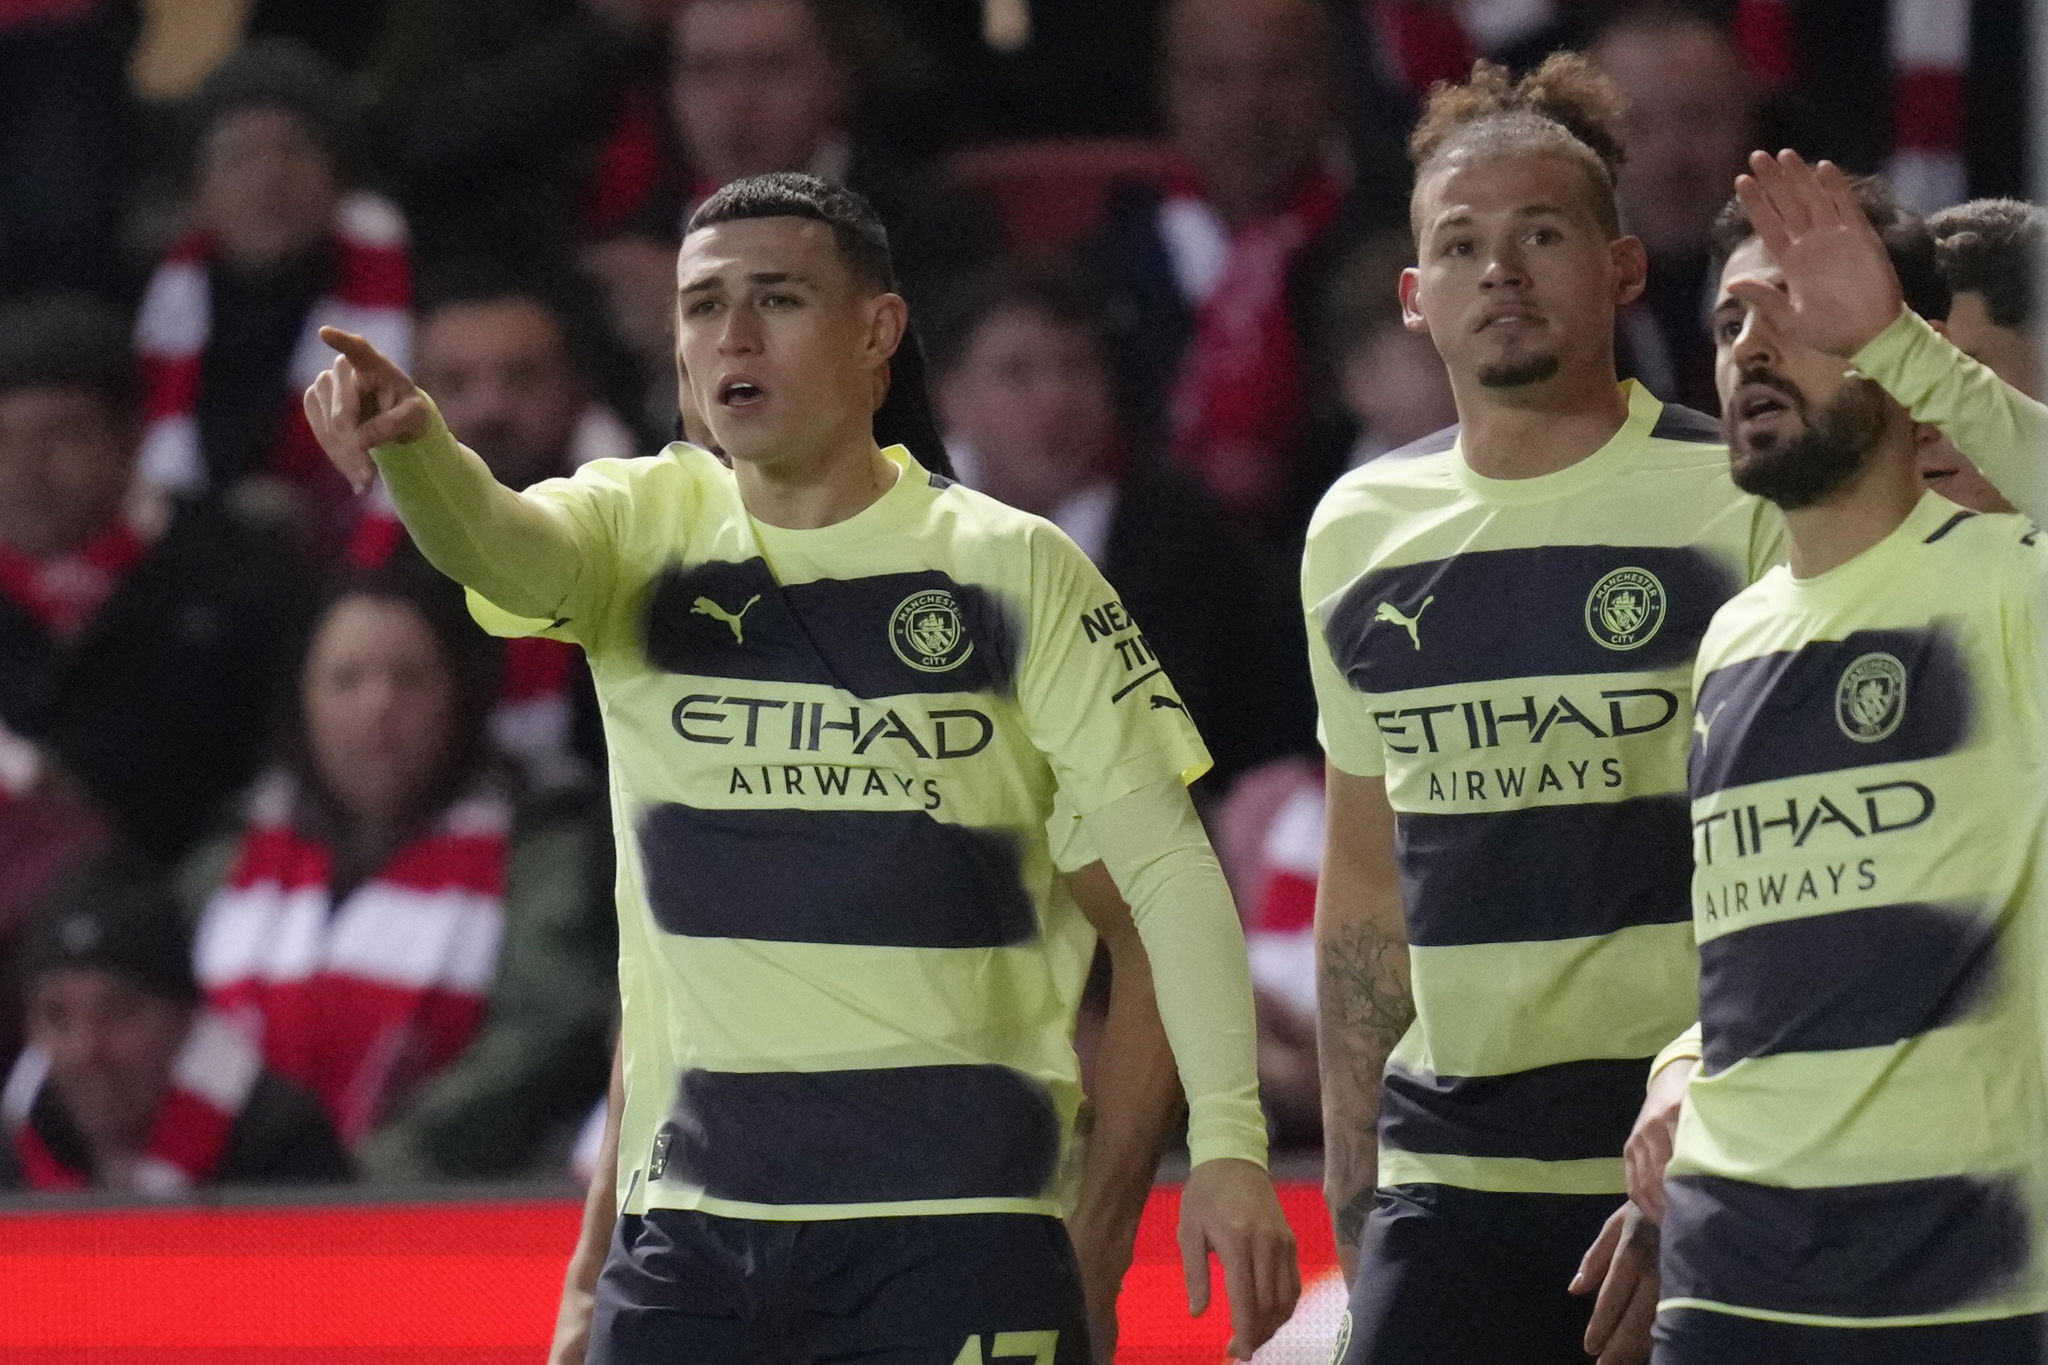 Manchester City's Phil Foden, left, celebrates with his teammates after scoring